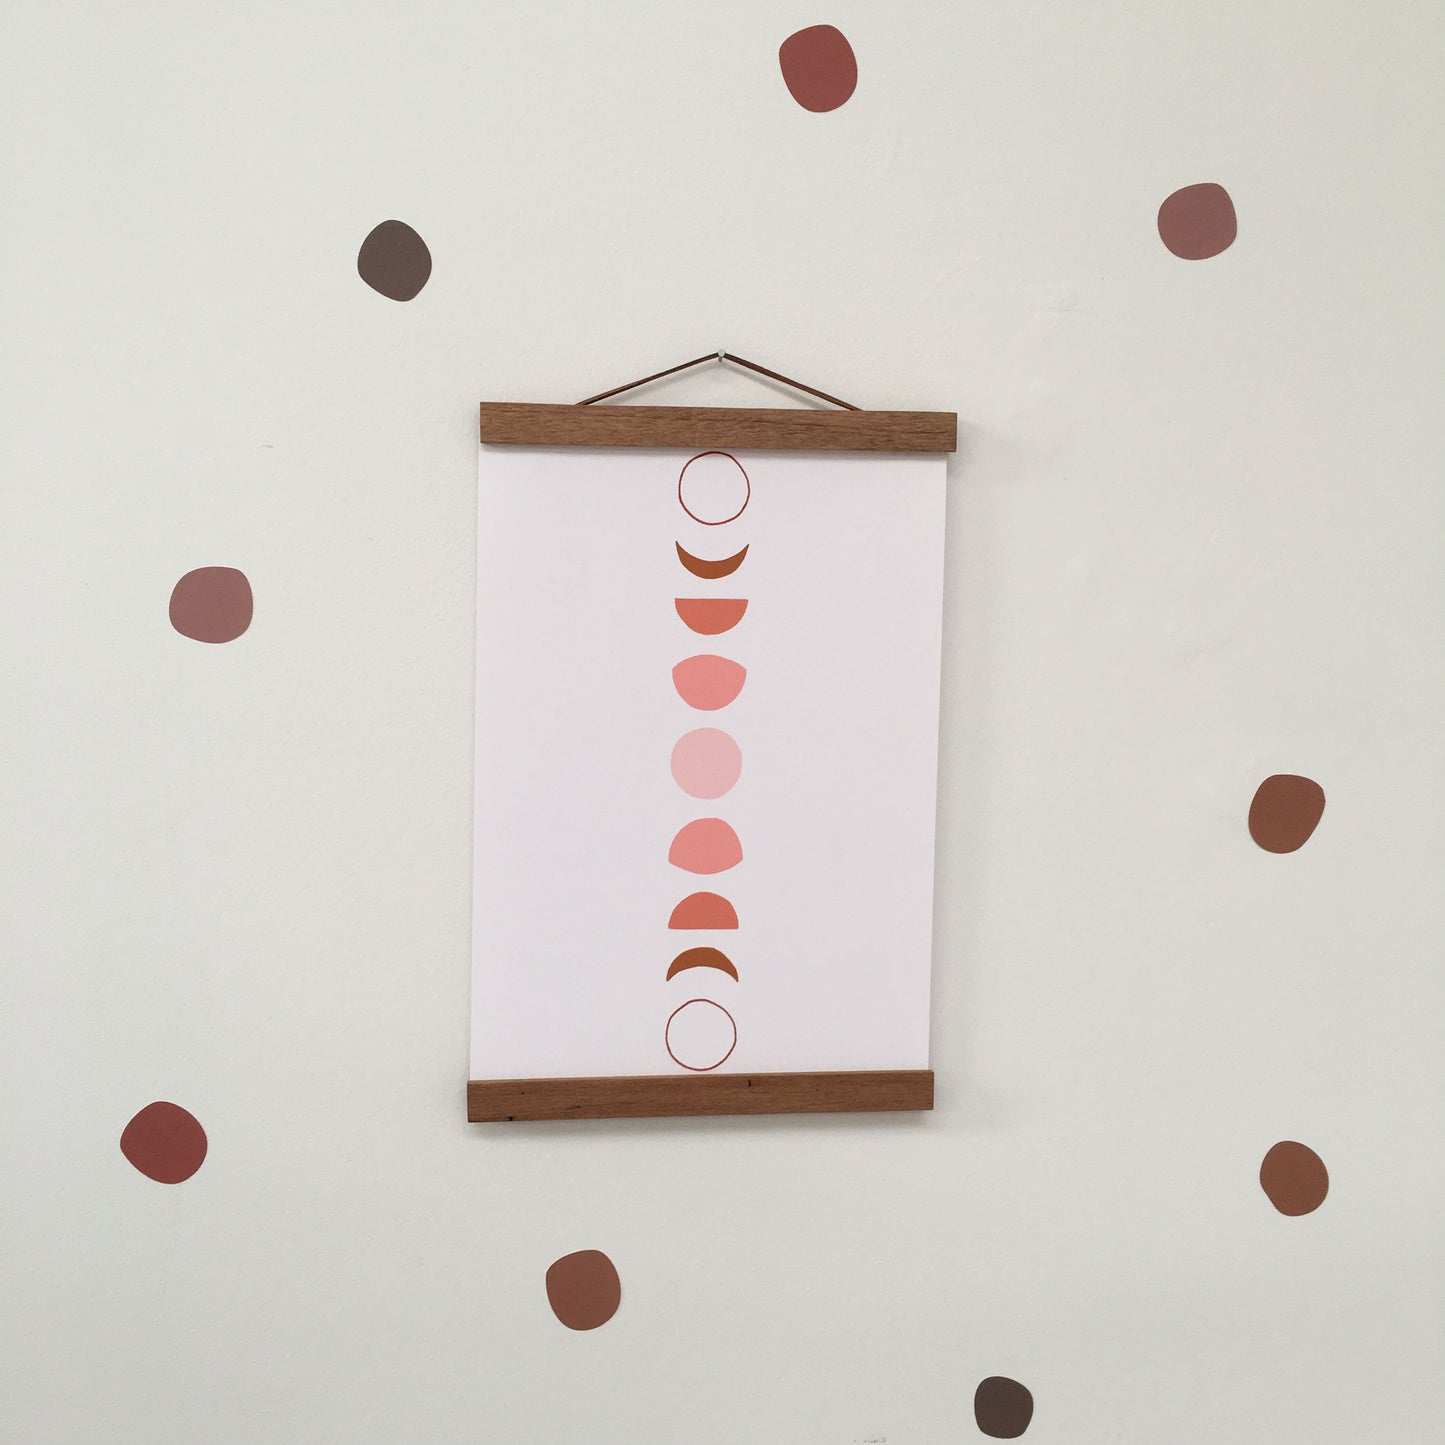 Phases of the moon - Art Print